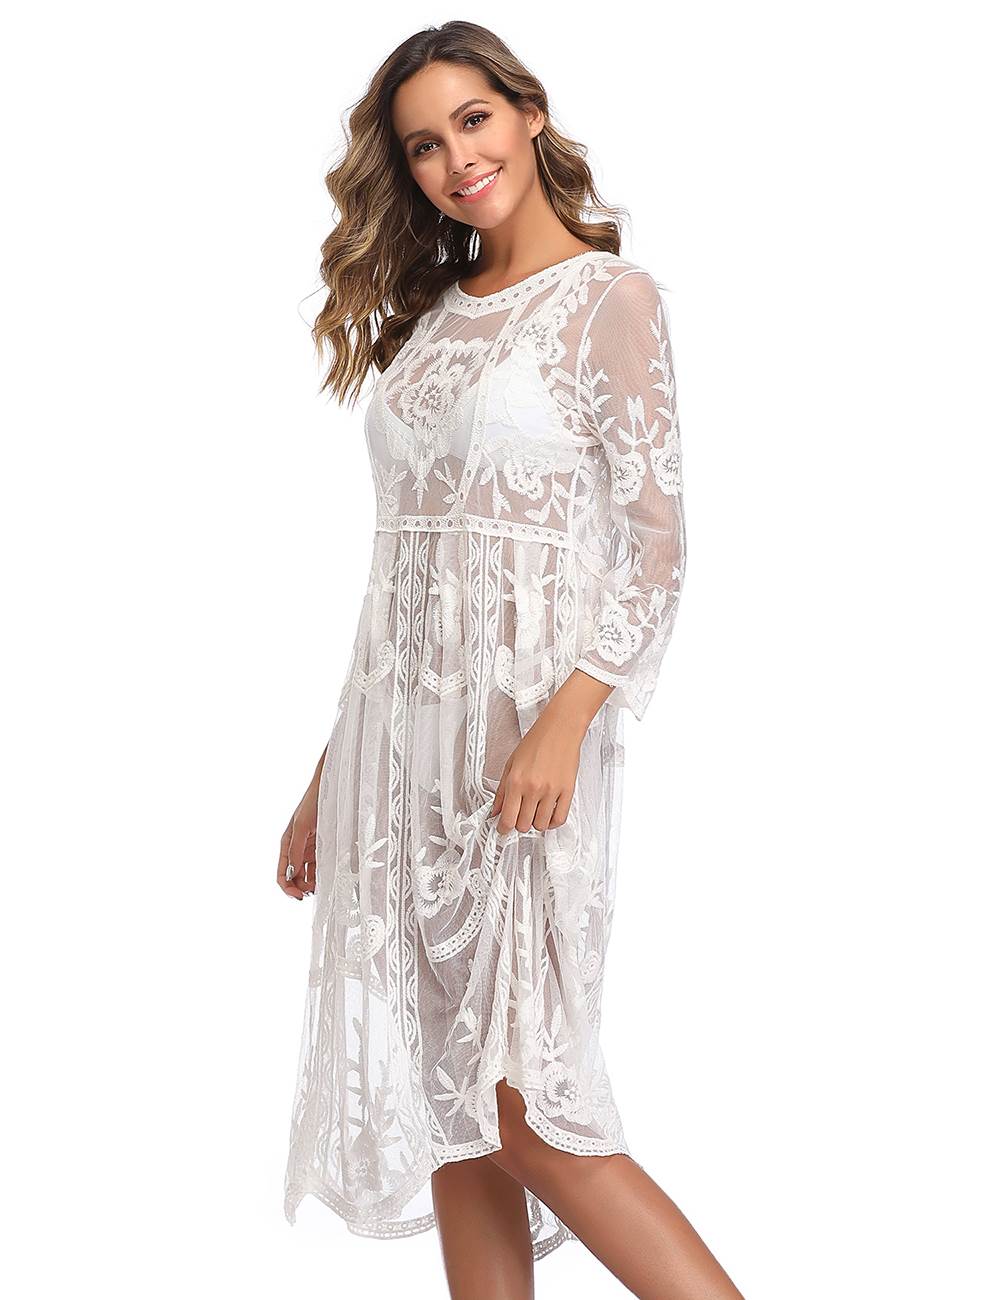 Long White Lace Floral Sumber Beach Dress | Ohyeah